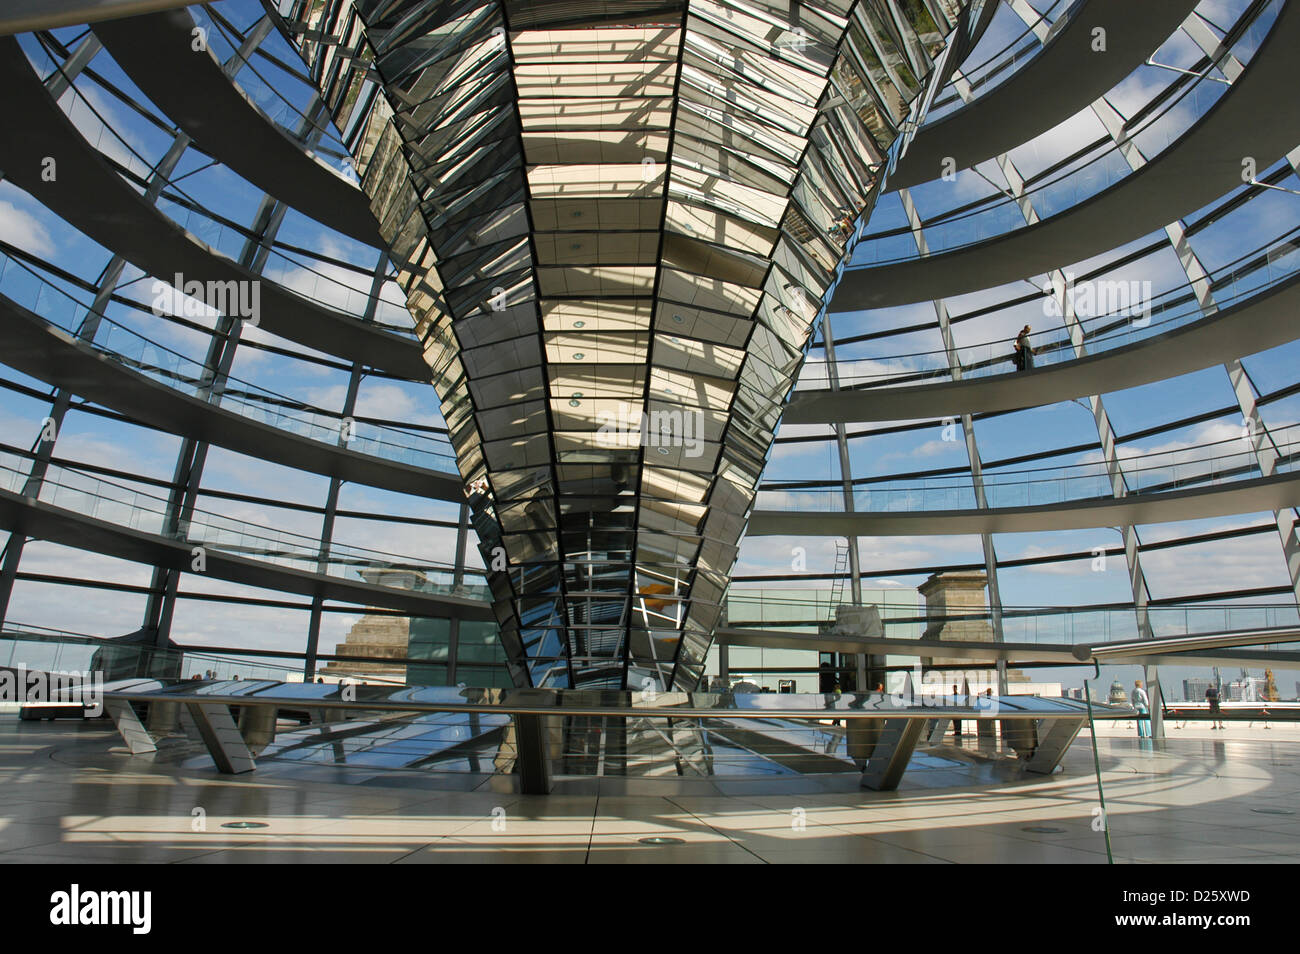 Dome of the Reichstag, seat of the German Parliament, designed by Norman Foster (b.1935). Interior. Berlin. Germany. Stock Photo